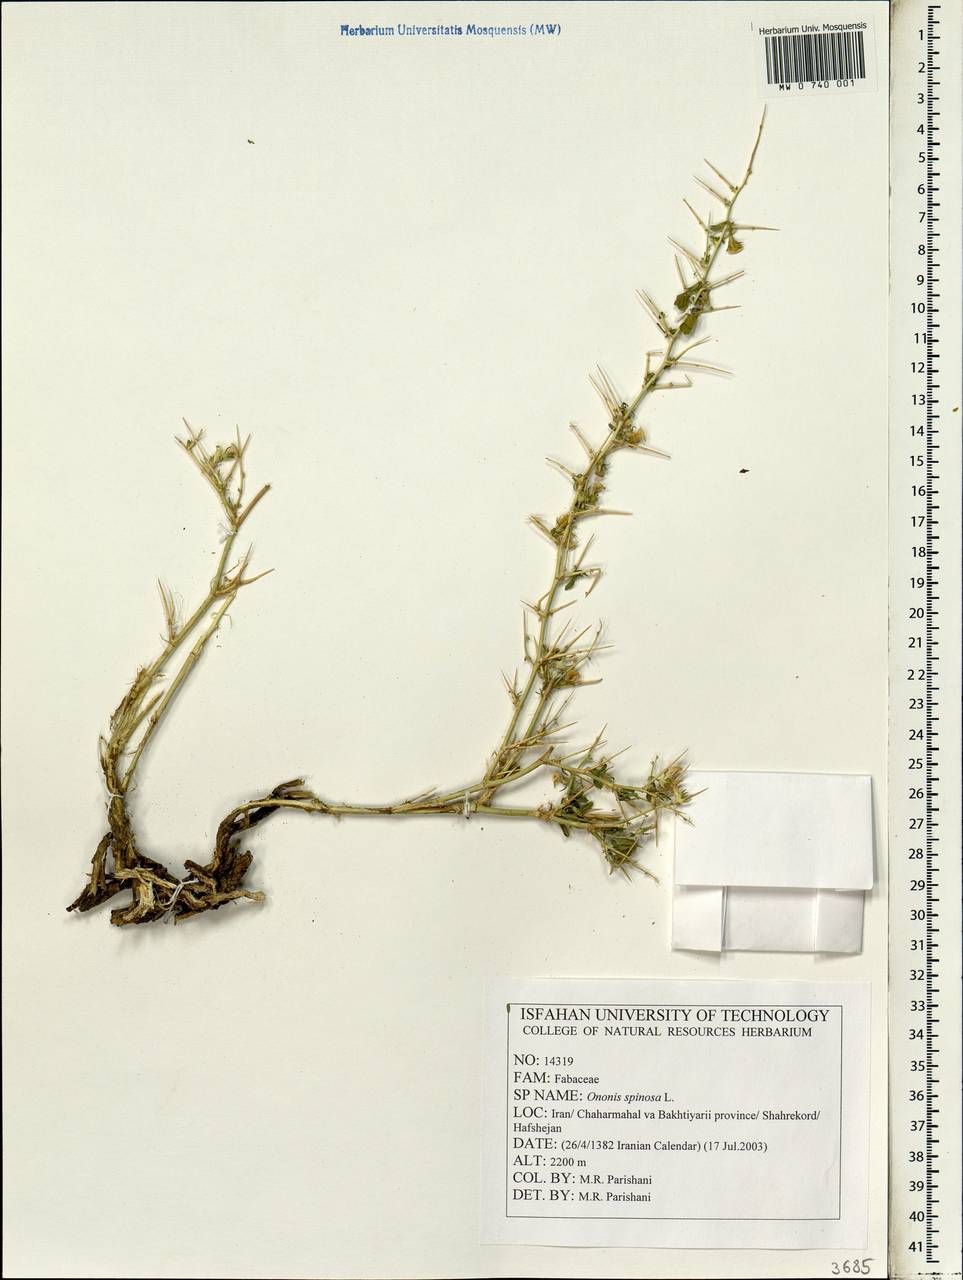 Ononis spinosa L., South Asia, South Asia (Asia outside ex-Soviet states and Mongolia) (ASIA) (Iran)